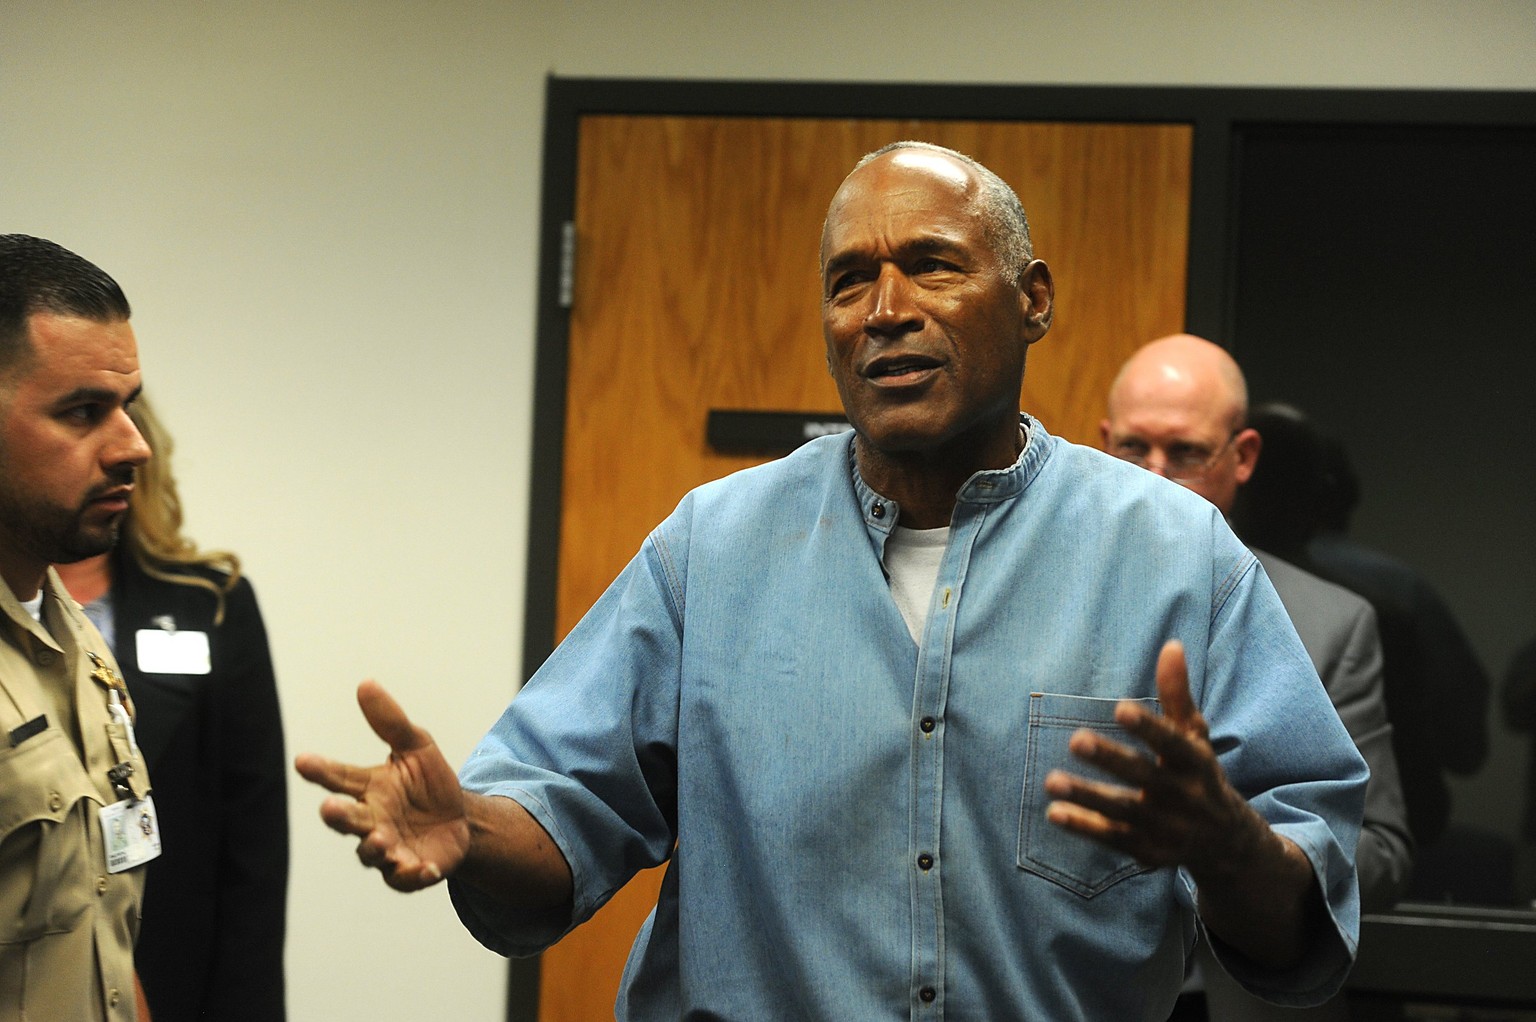 epa06100304 O.J. Simpson (R) reacts after learning he was granted parole at Lovelock Correctional Center (LCC), in Lovelock, Nevada, USA, 20 July 2017. Simpson, 70, is serving a nine to 33 year prison ...